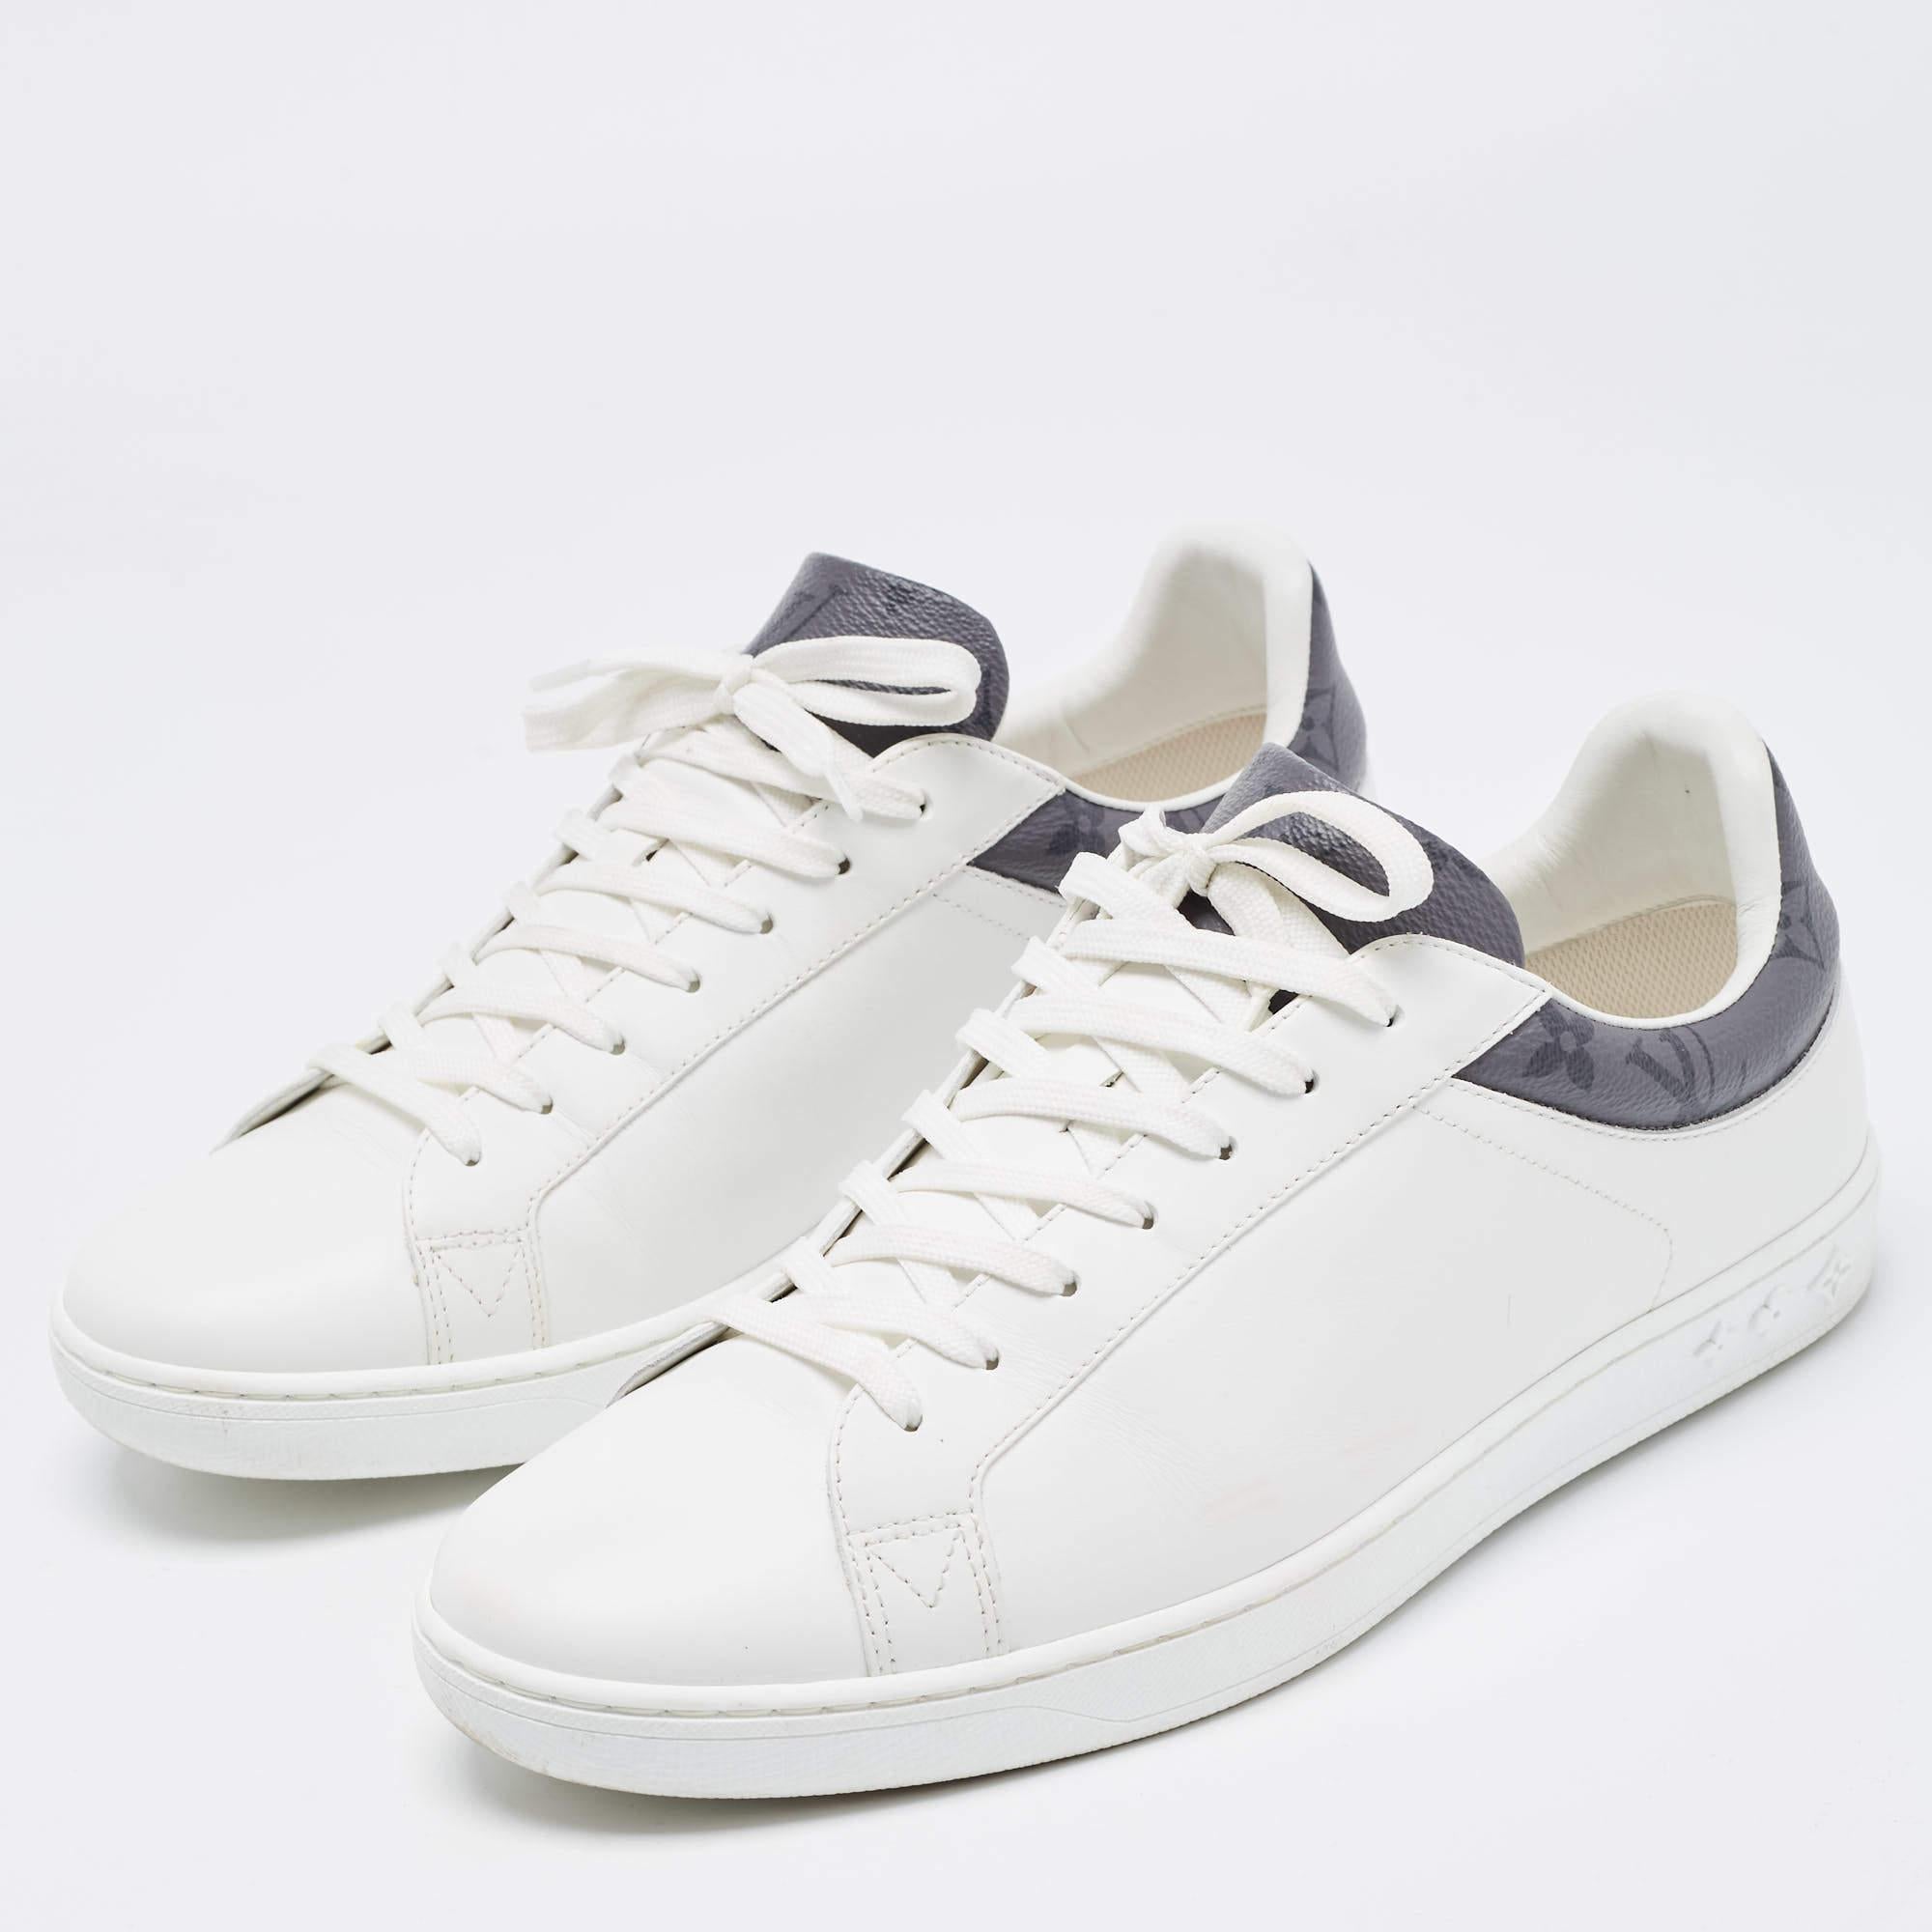 Louis Vuitton White Leather Luxembourg Sneakers Size 41 4